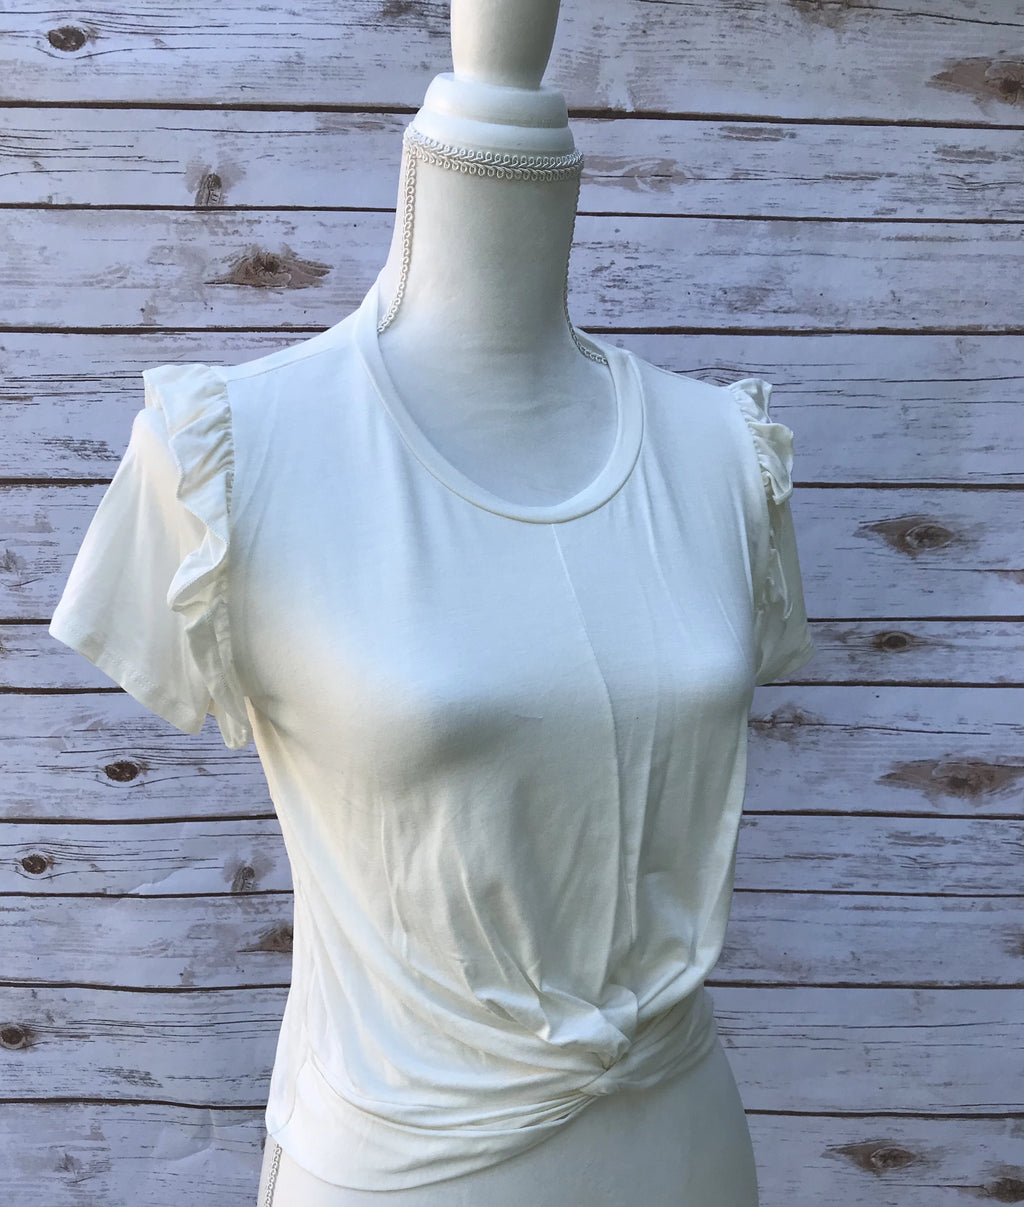 Tory Creme Top with Ruffled Sleeve - Elizabeth's Boutique 